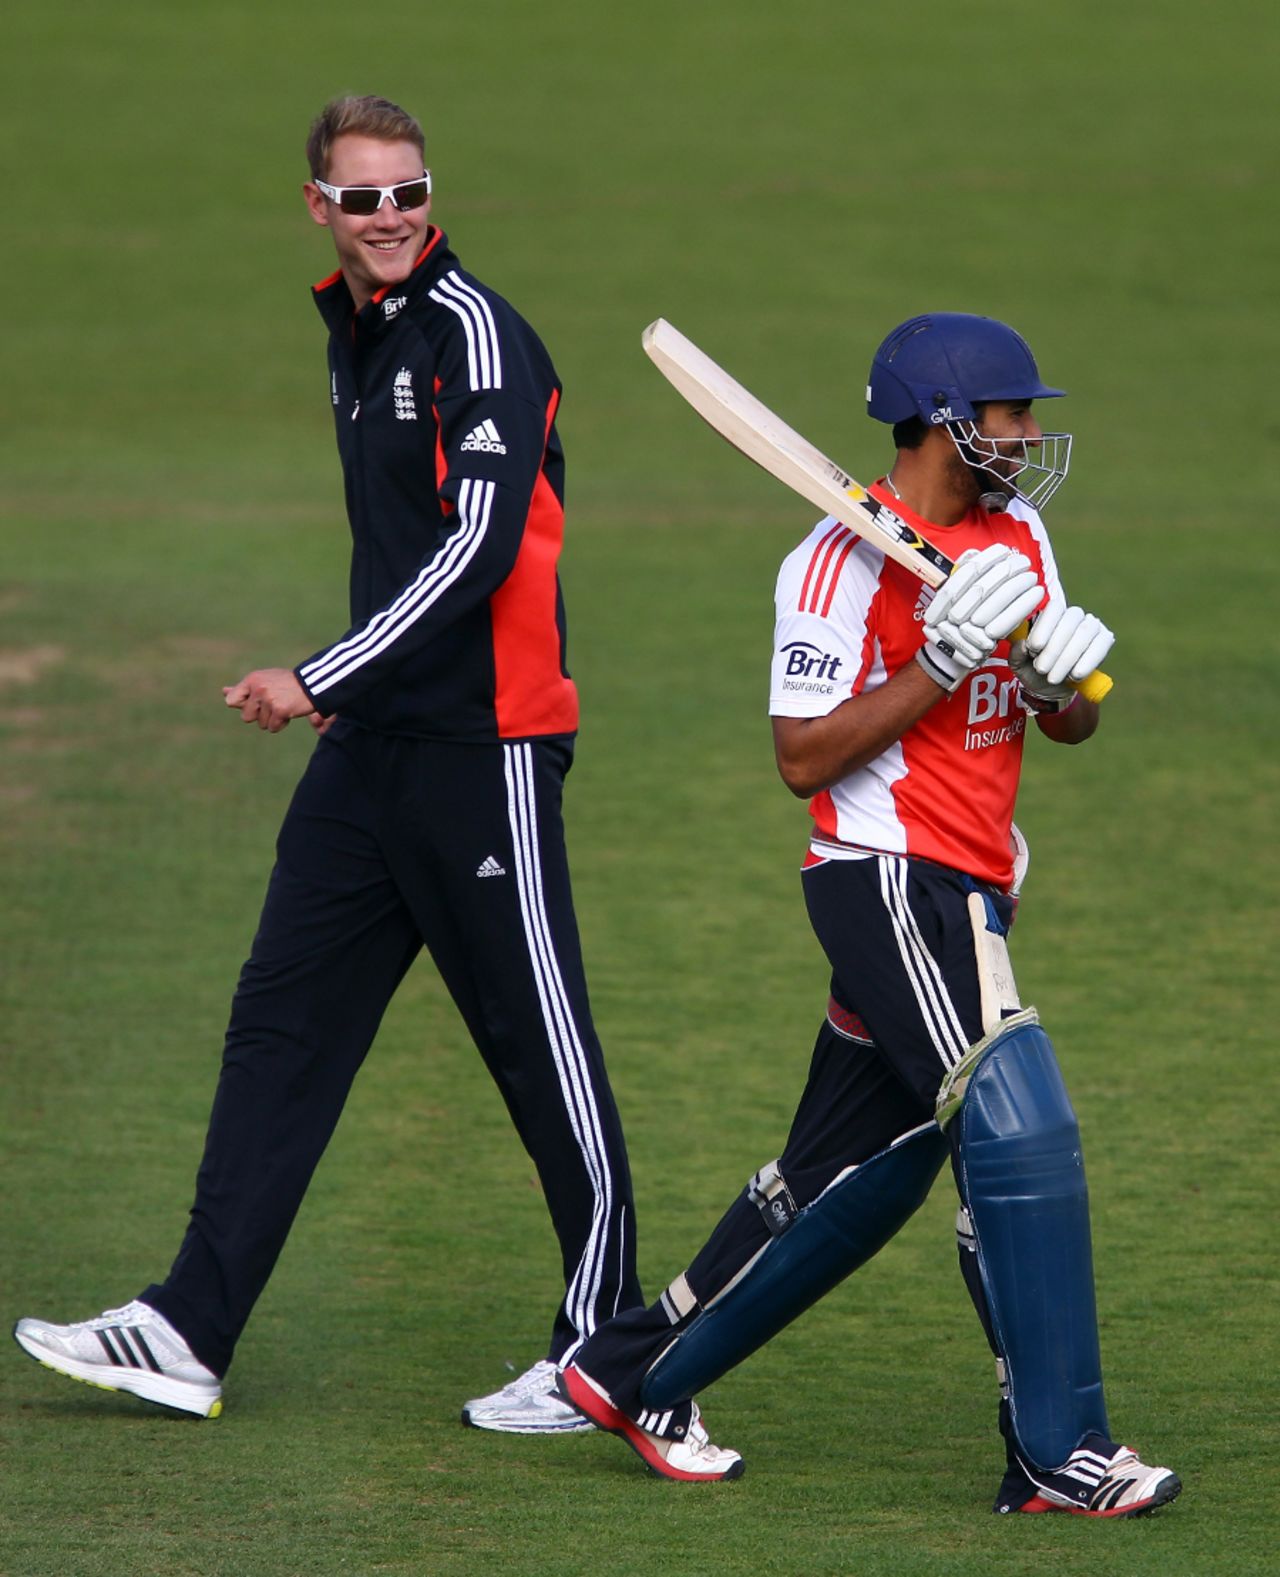 Stuart Broad and Ravi Bopara pass each other during England's training session, The Oval, September 22 2011